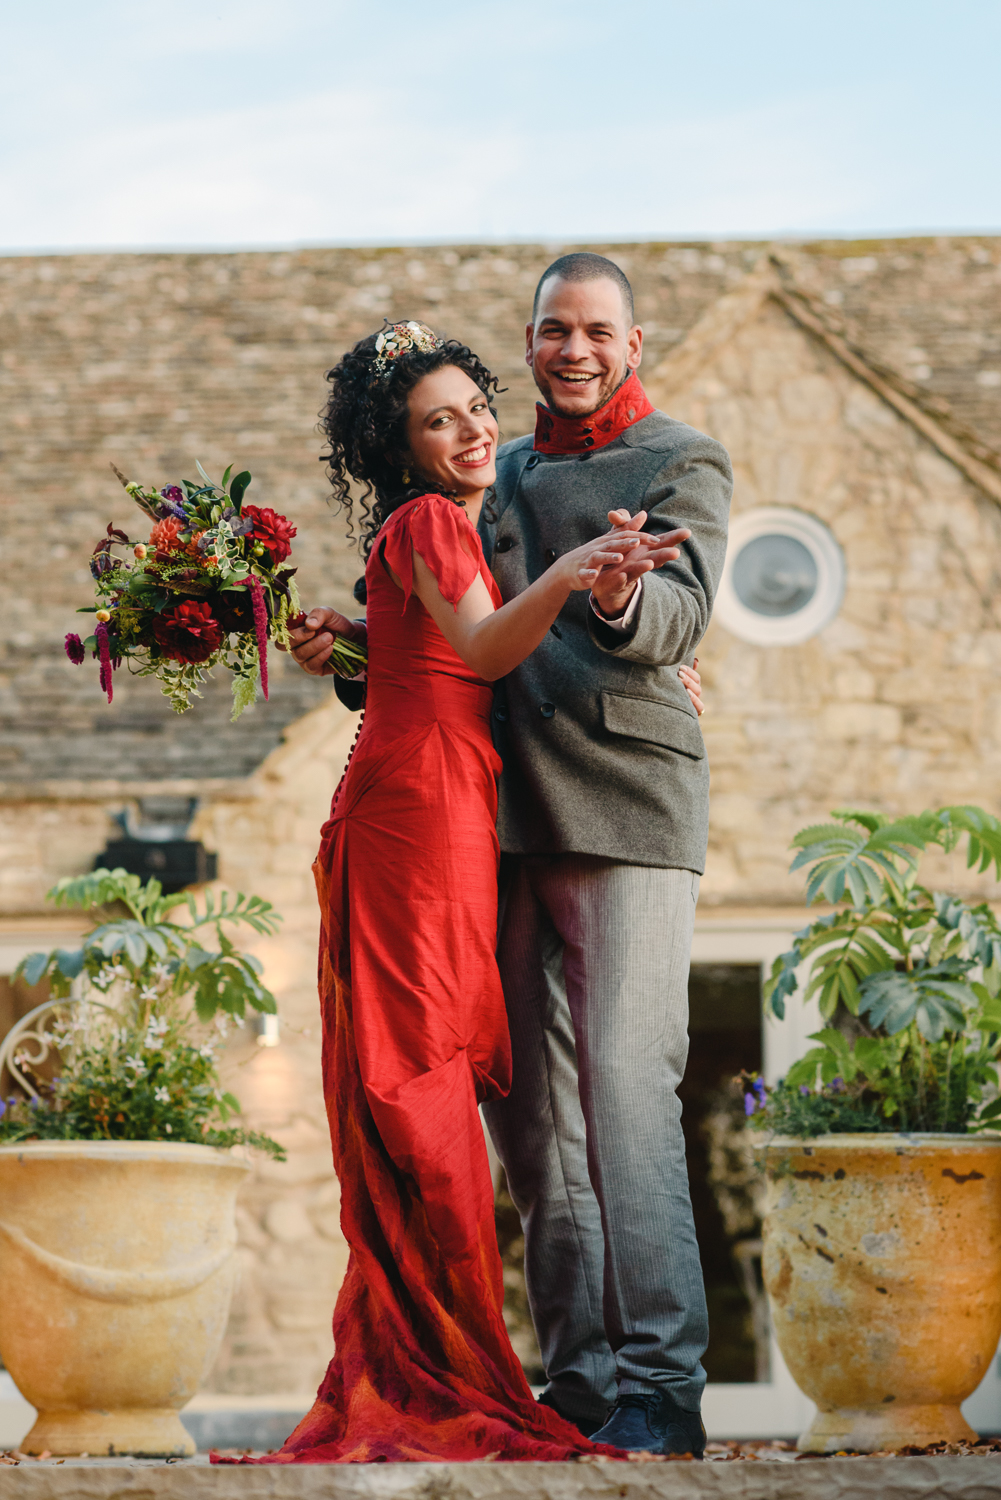 Ethical Wedding Ideas A Red Wedding Dress and Bespoke Accessories